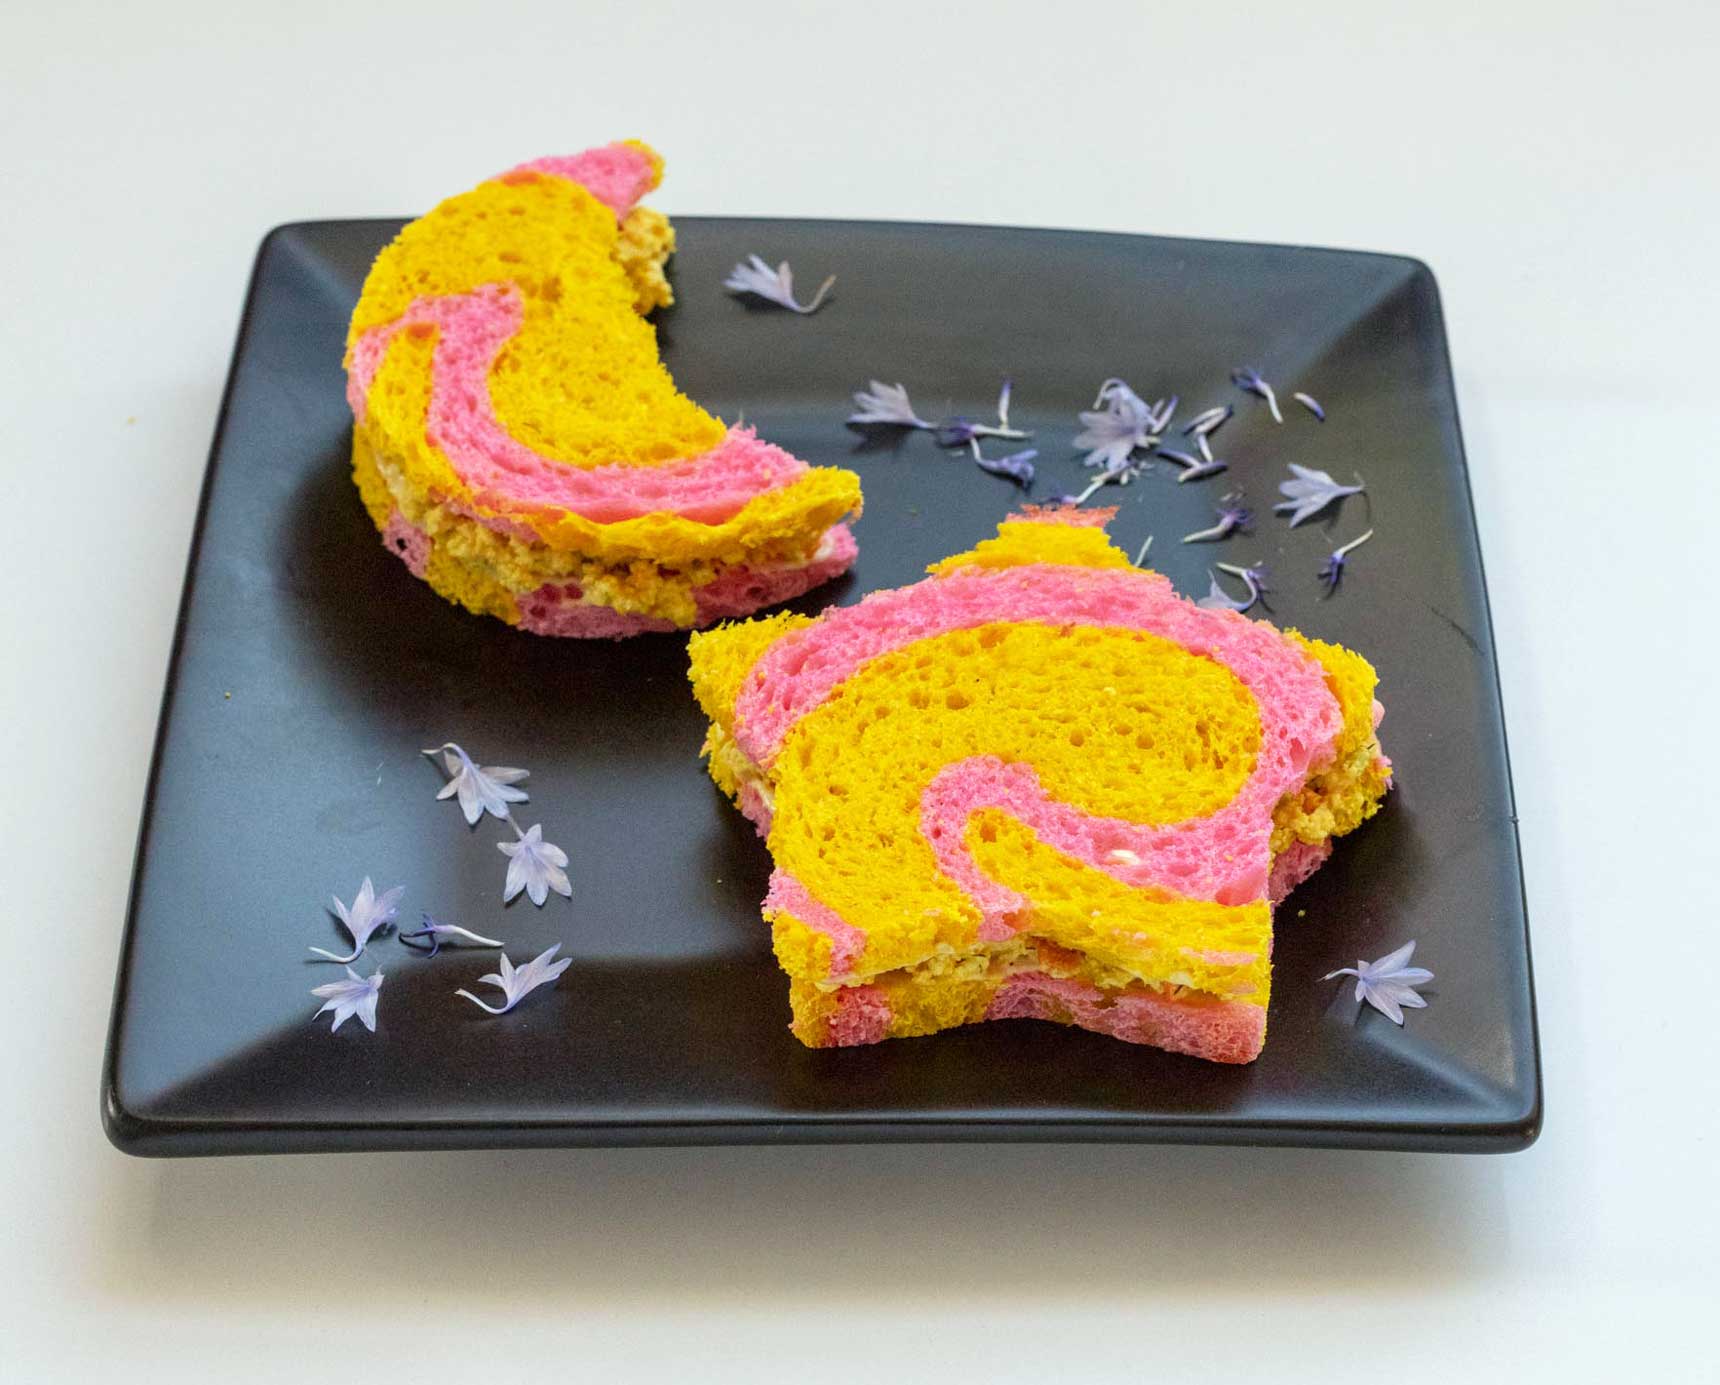 moon and star shaped tea sandwiches on pink and yellow bread